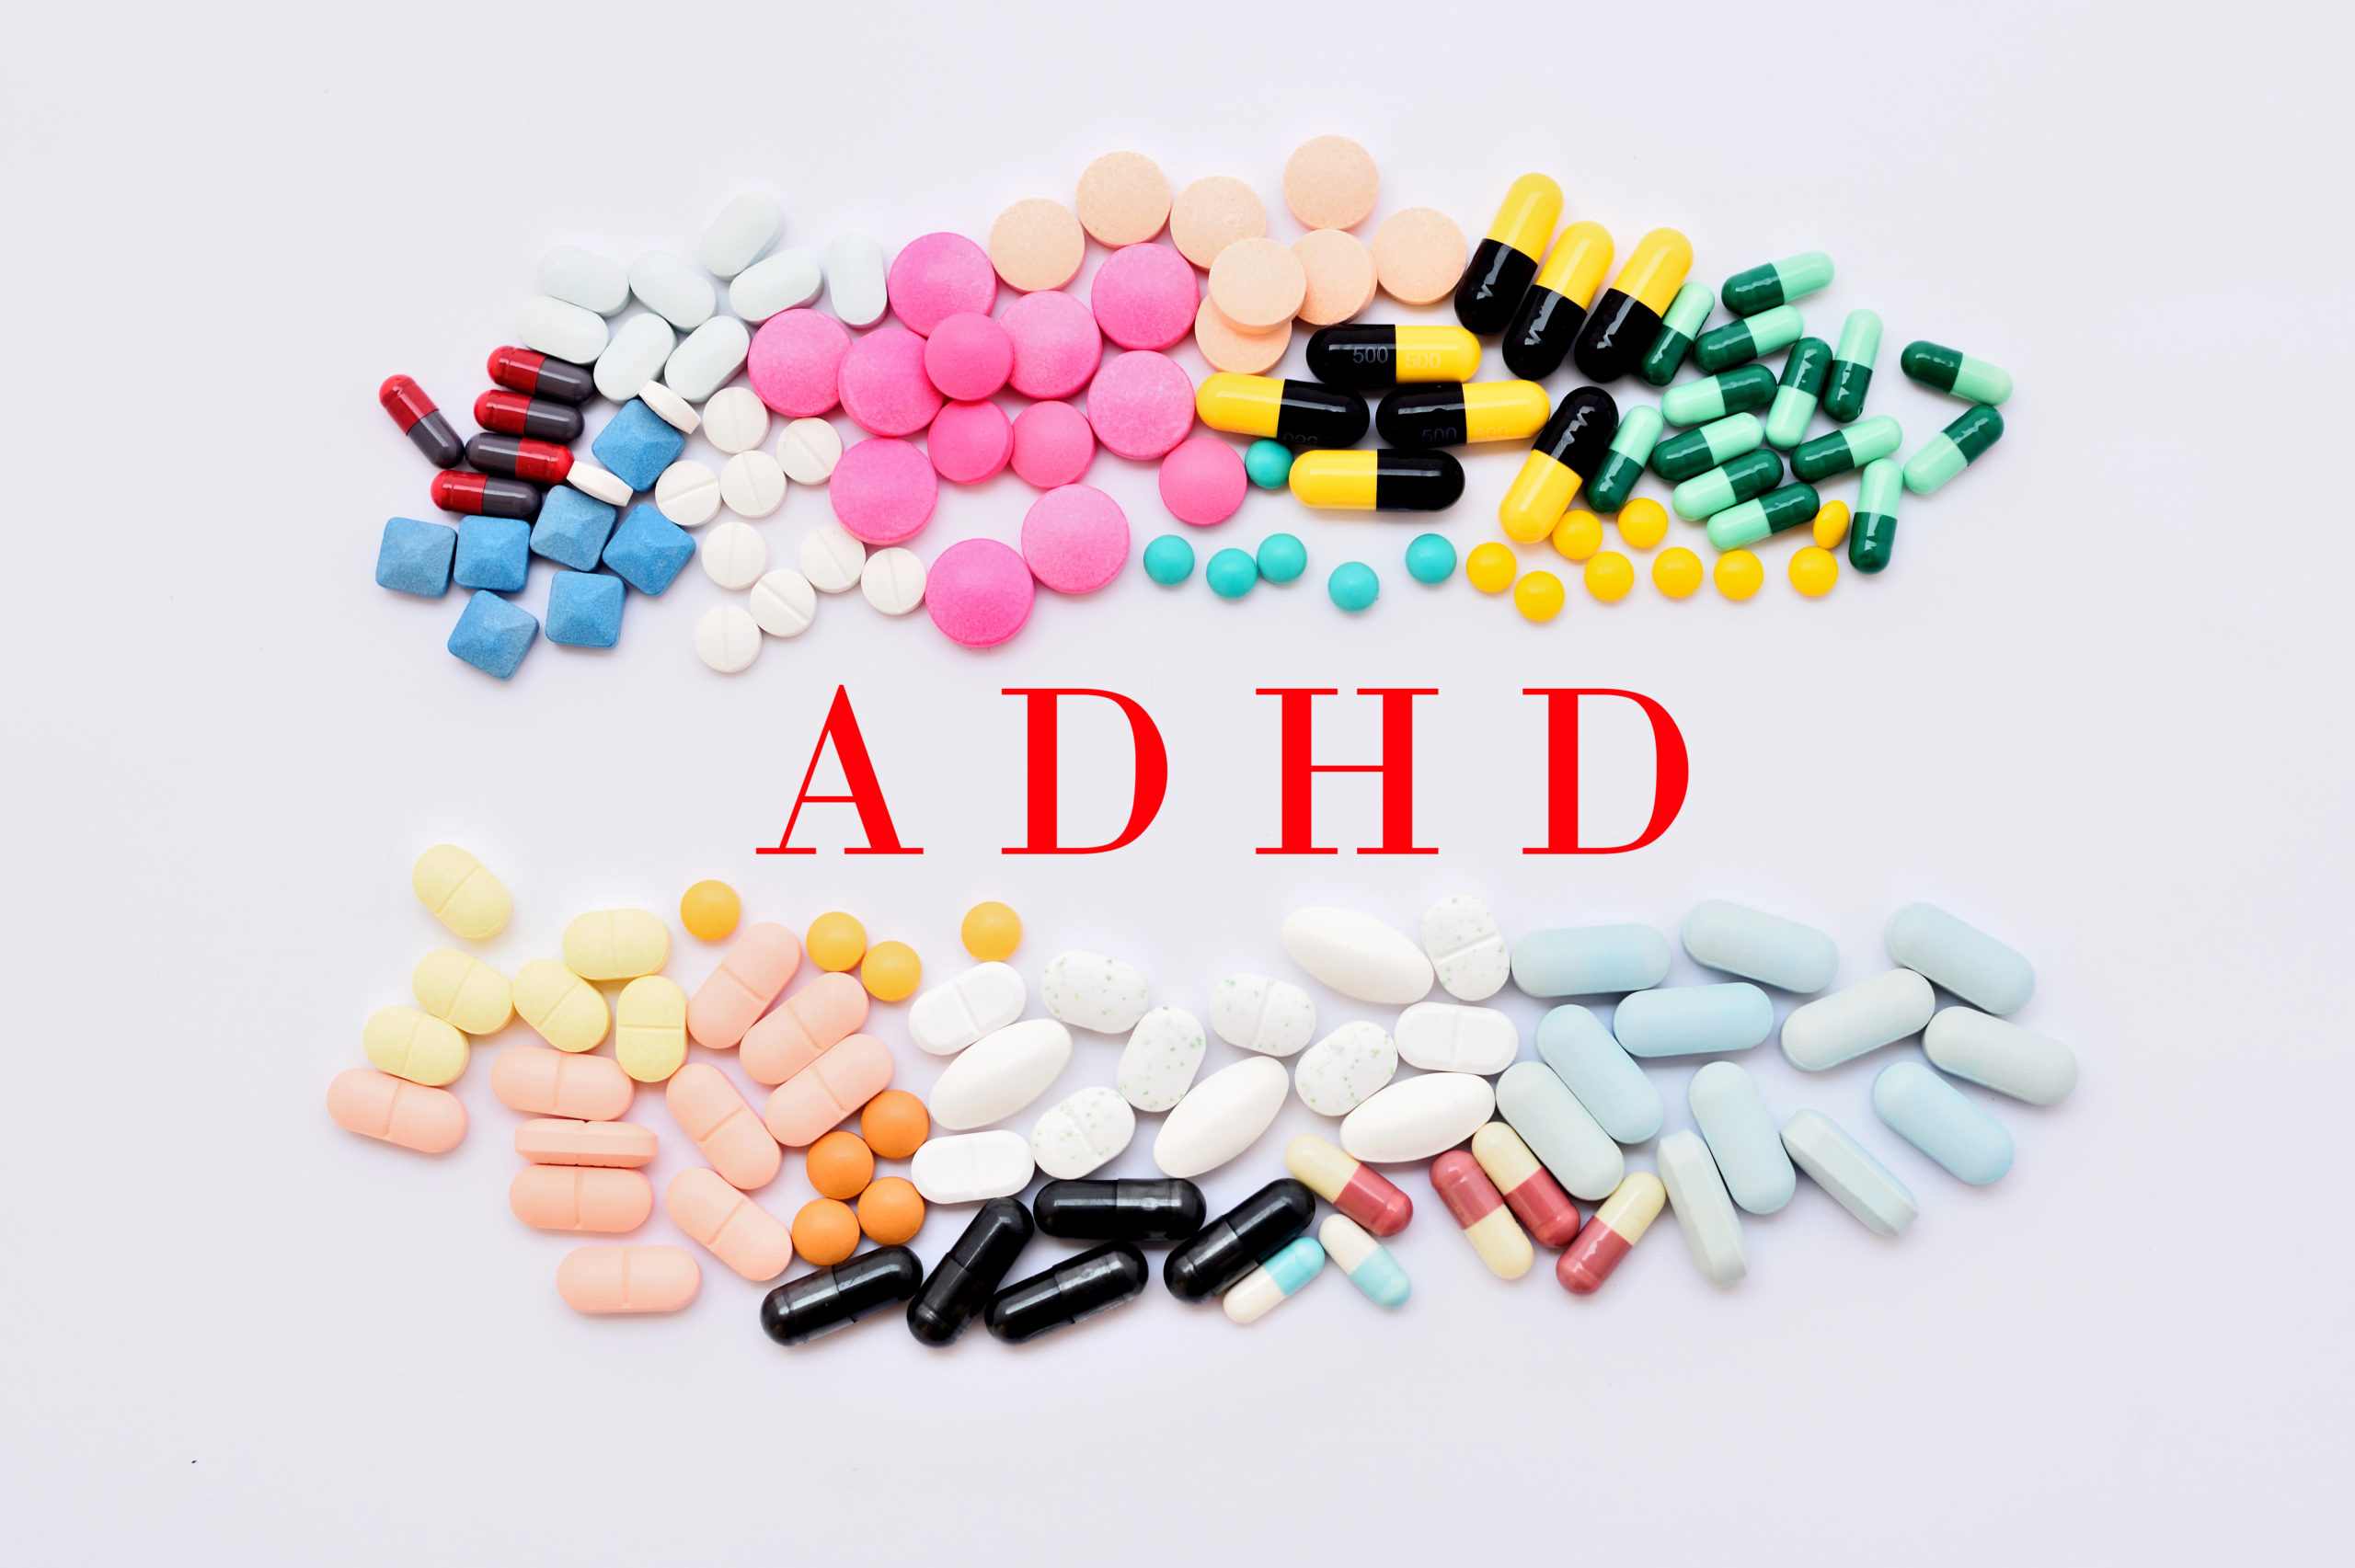 adhd medication comparison with the word ADHD in the center of pills